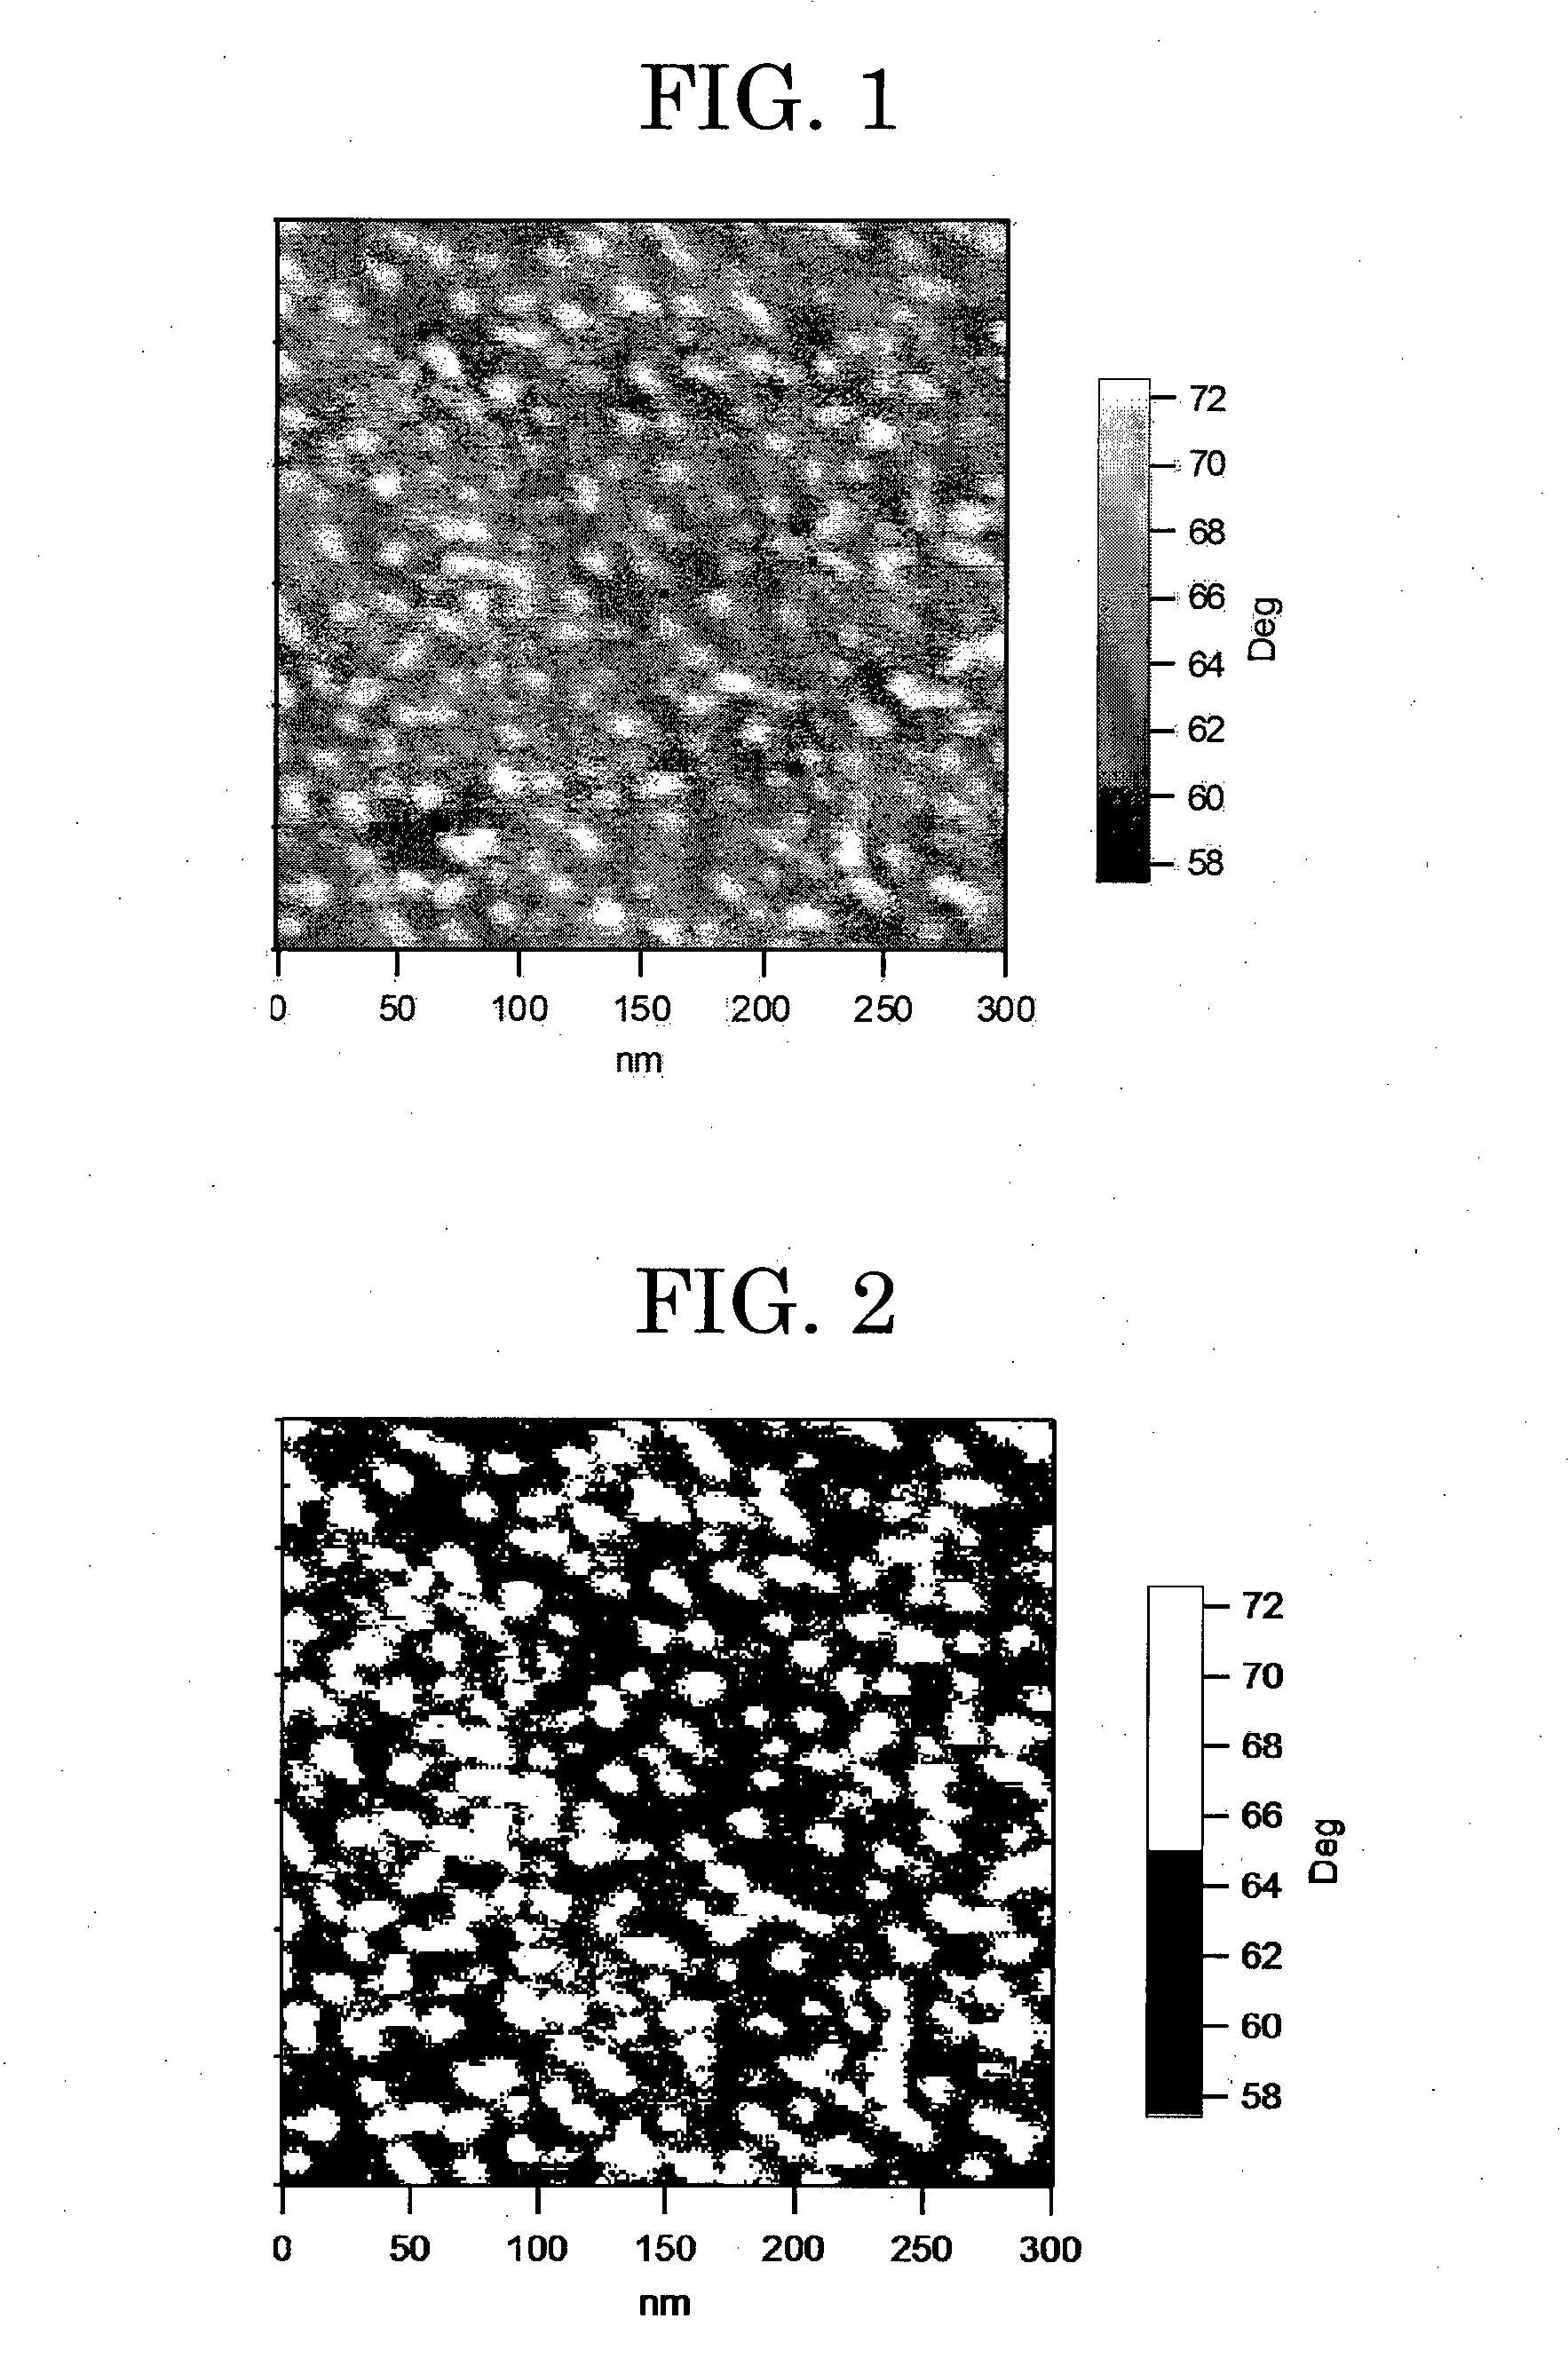 Toner, developer, image forming apparatus, and image forming method